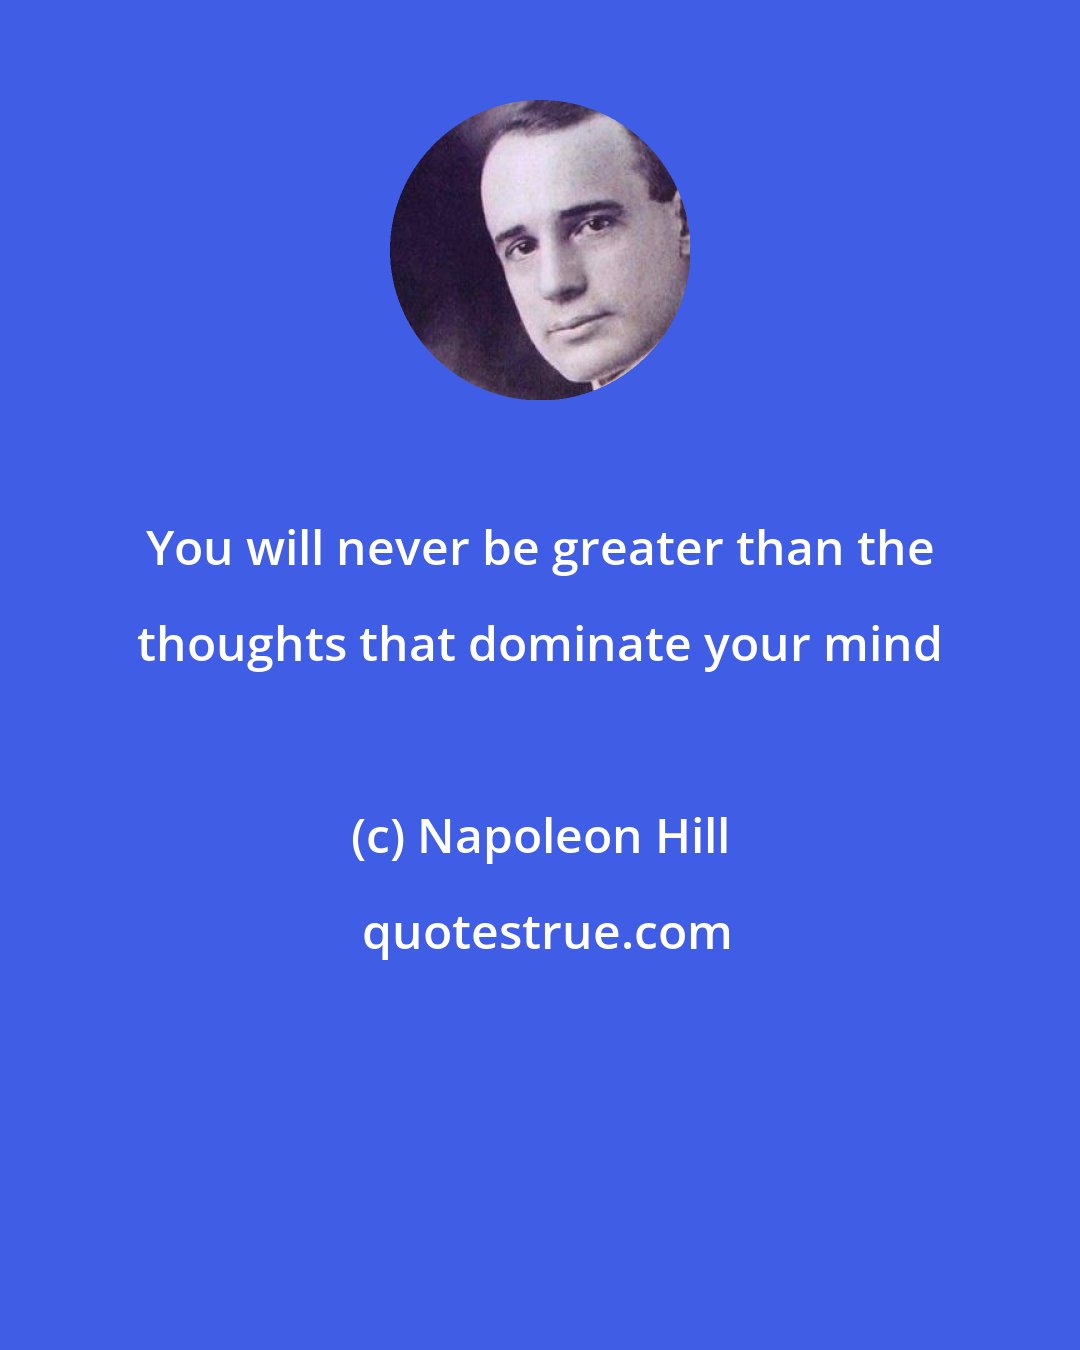 Napoleon Hill: You will never be greater than the thoughts that dominate your mind